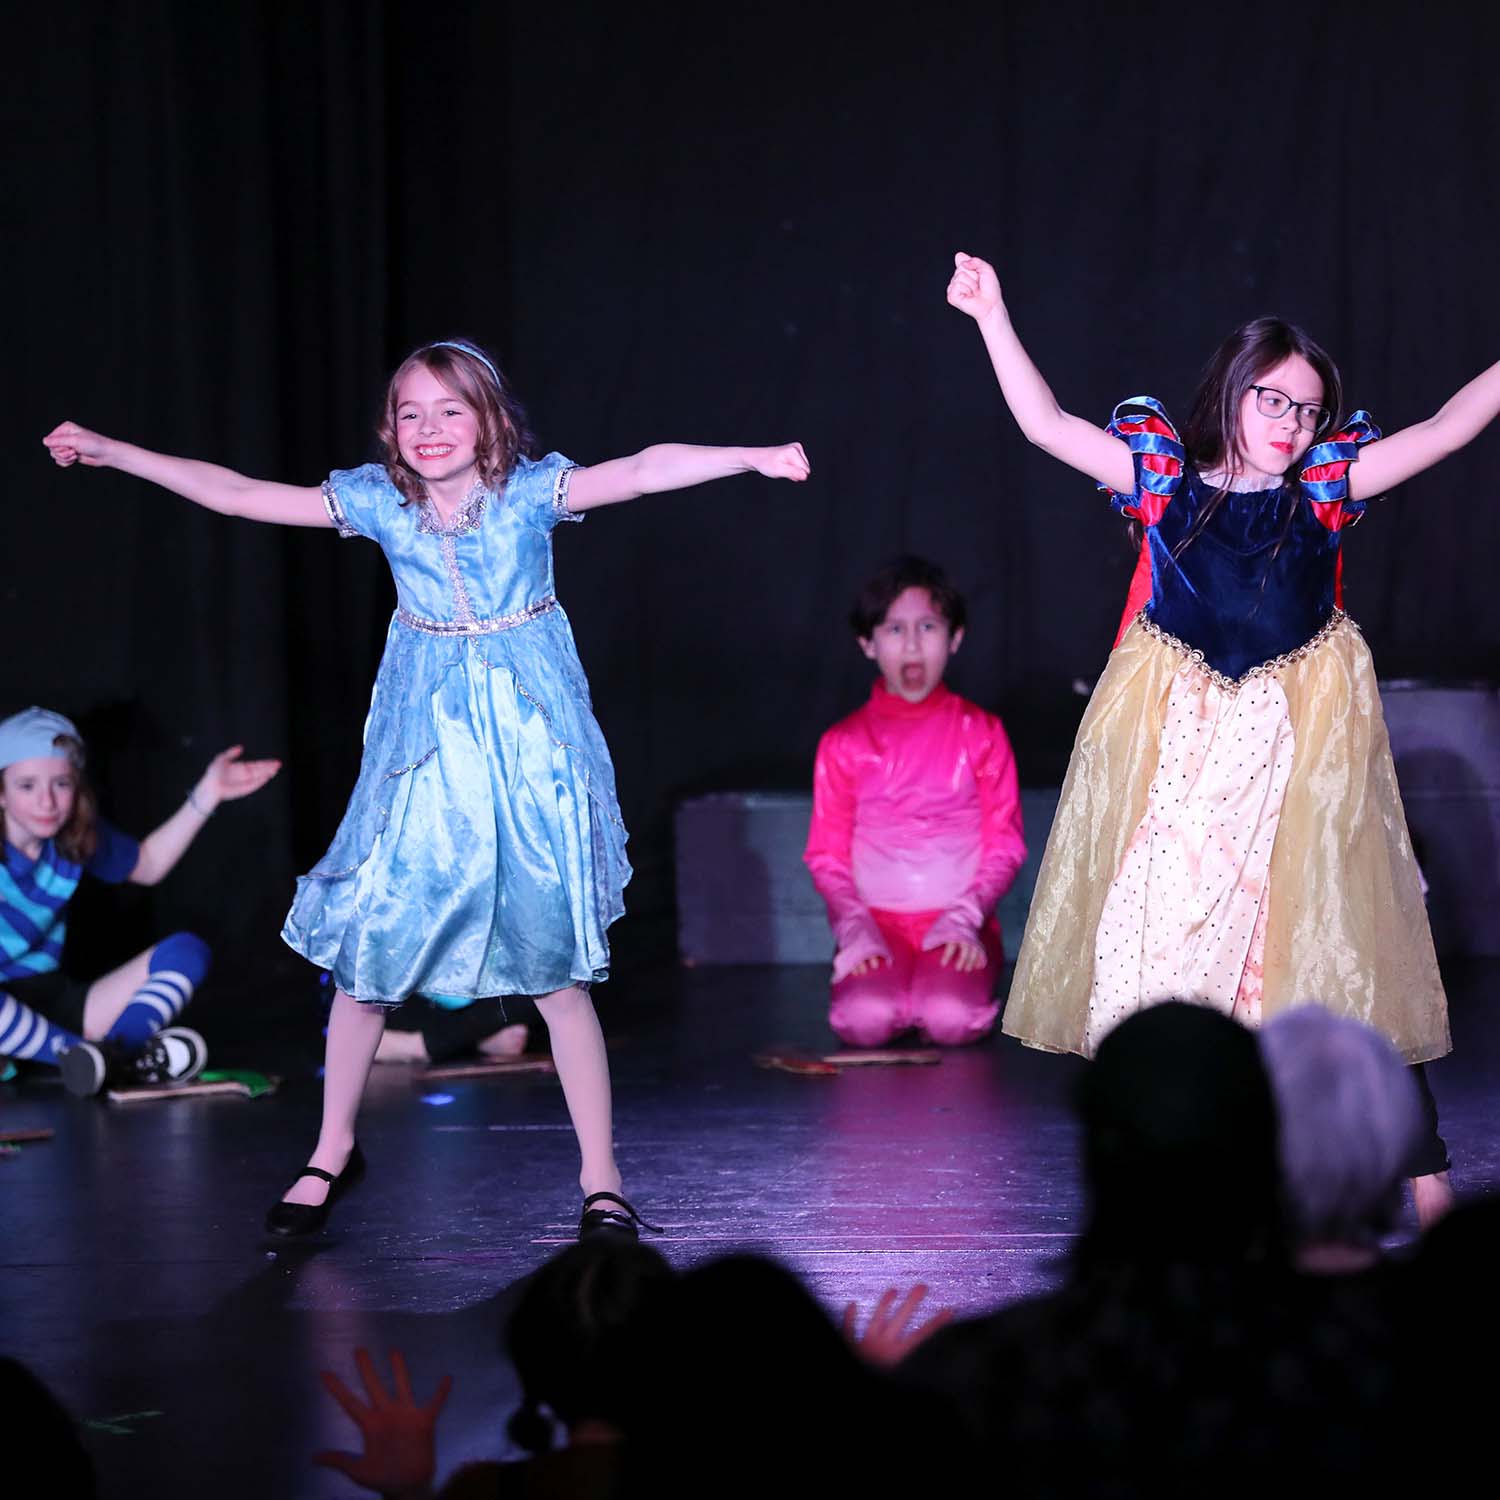 Children's theatre in Bellingham WA - students perform drama for kids. Image shows young children age 5 age 6 age 7 and age 8 performing Snow White on stage.